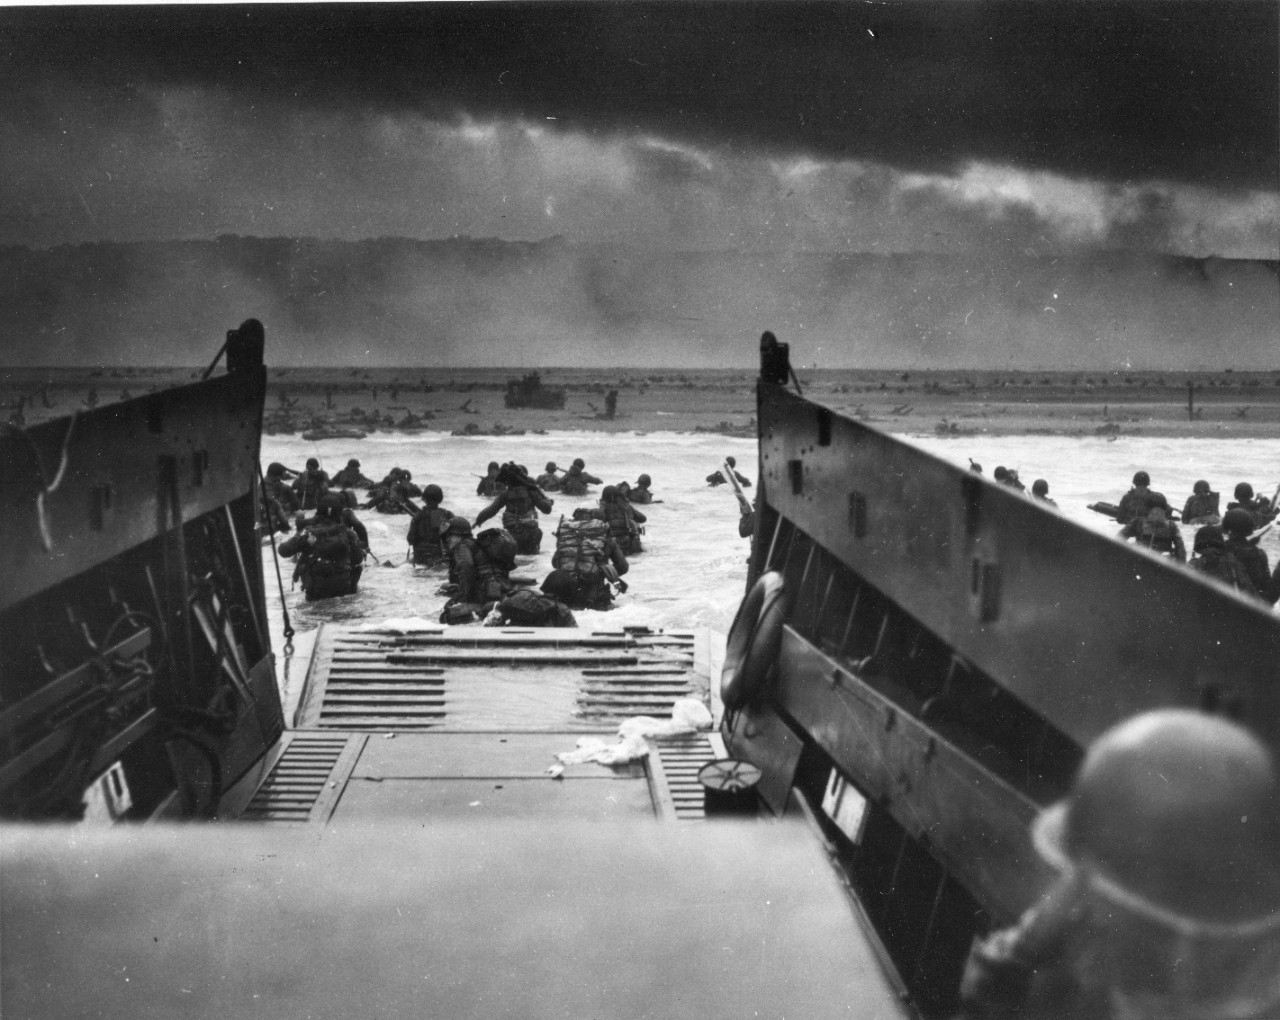 Omaha Beach during the D-Day landings